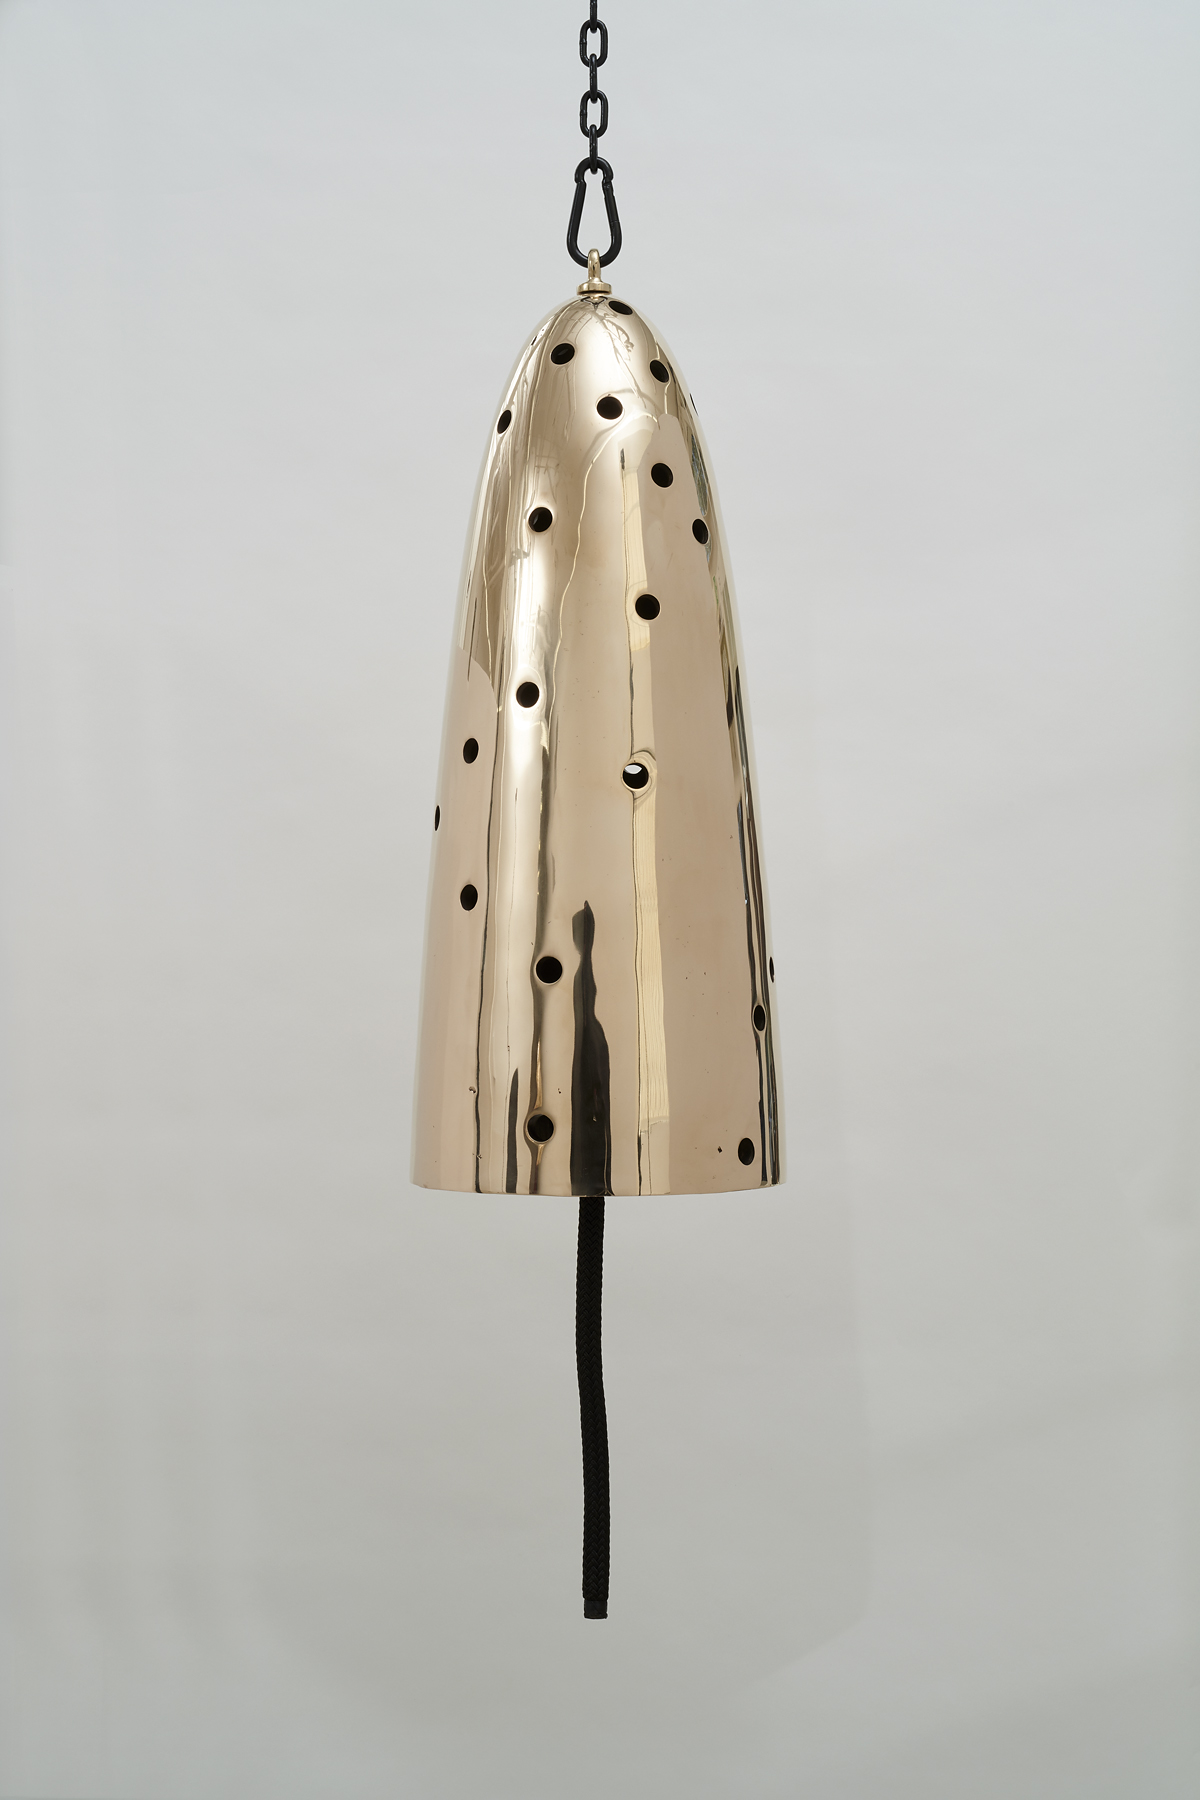  Davina Semo,  Seducer , 2019, Polished and patinated cast bronze bell, whipped., nylon line, wooden clapper, powder-coated chain, hardware, Bell: 32 inches tall x 13 inches diameter / 81 cm tall x 33 cm diameter, overall dimensions variable 